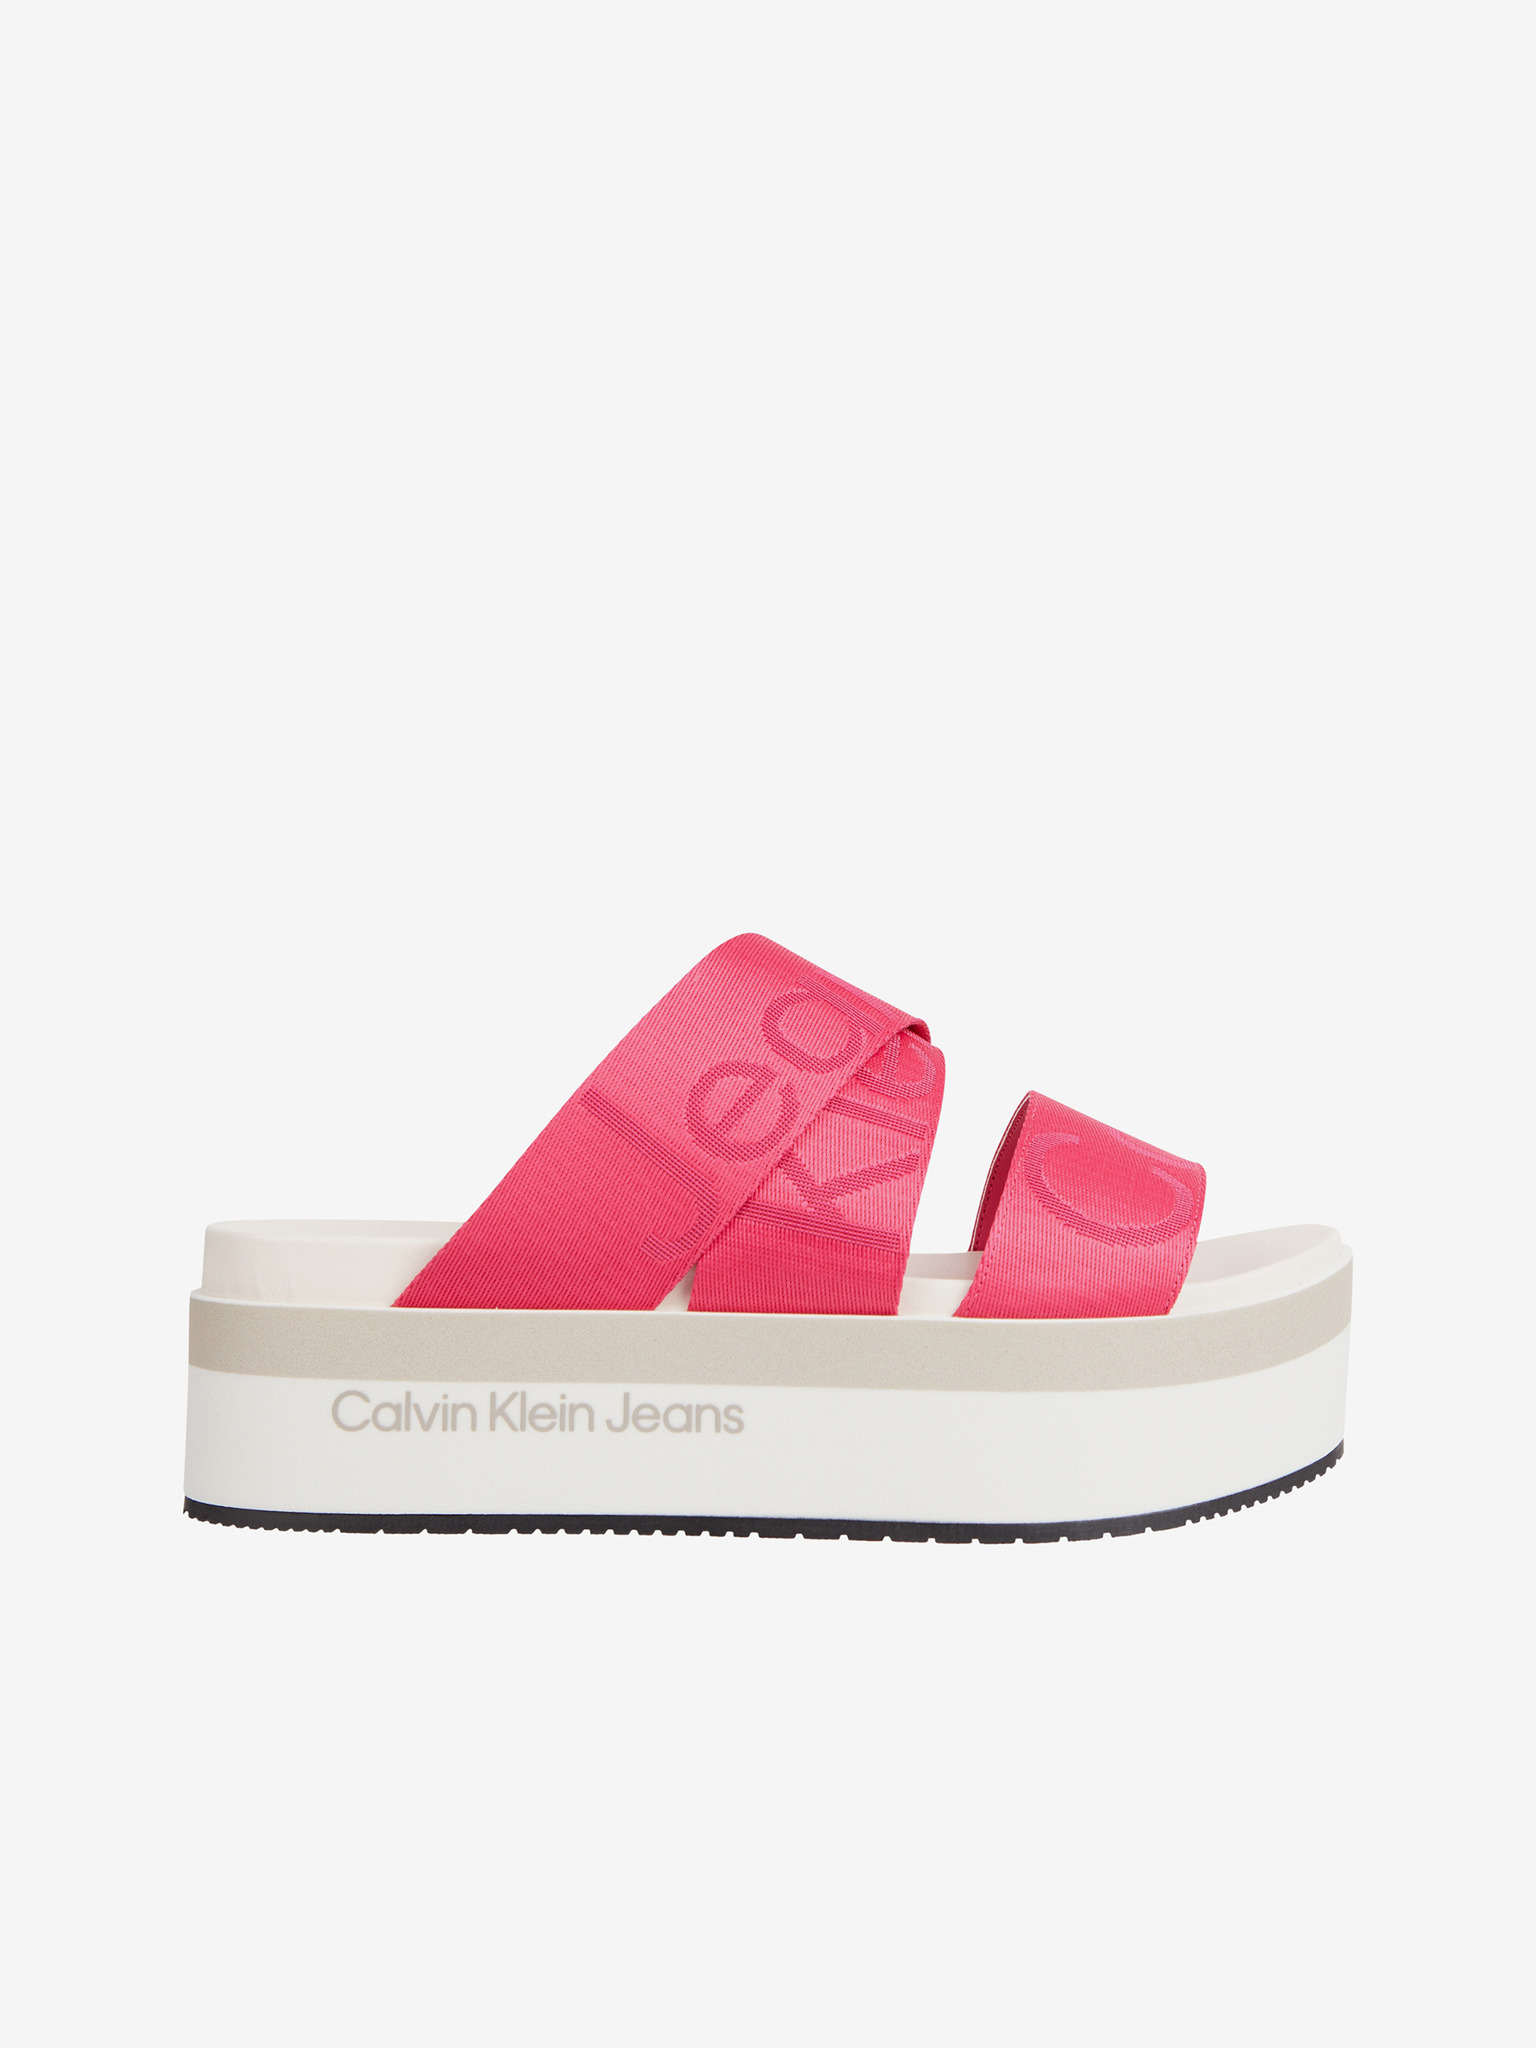 CALVIN KLEIN JEANS Shoes women pink size EU XL - Fast delivery